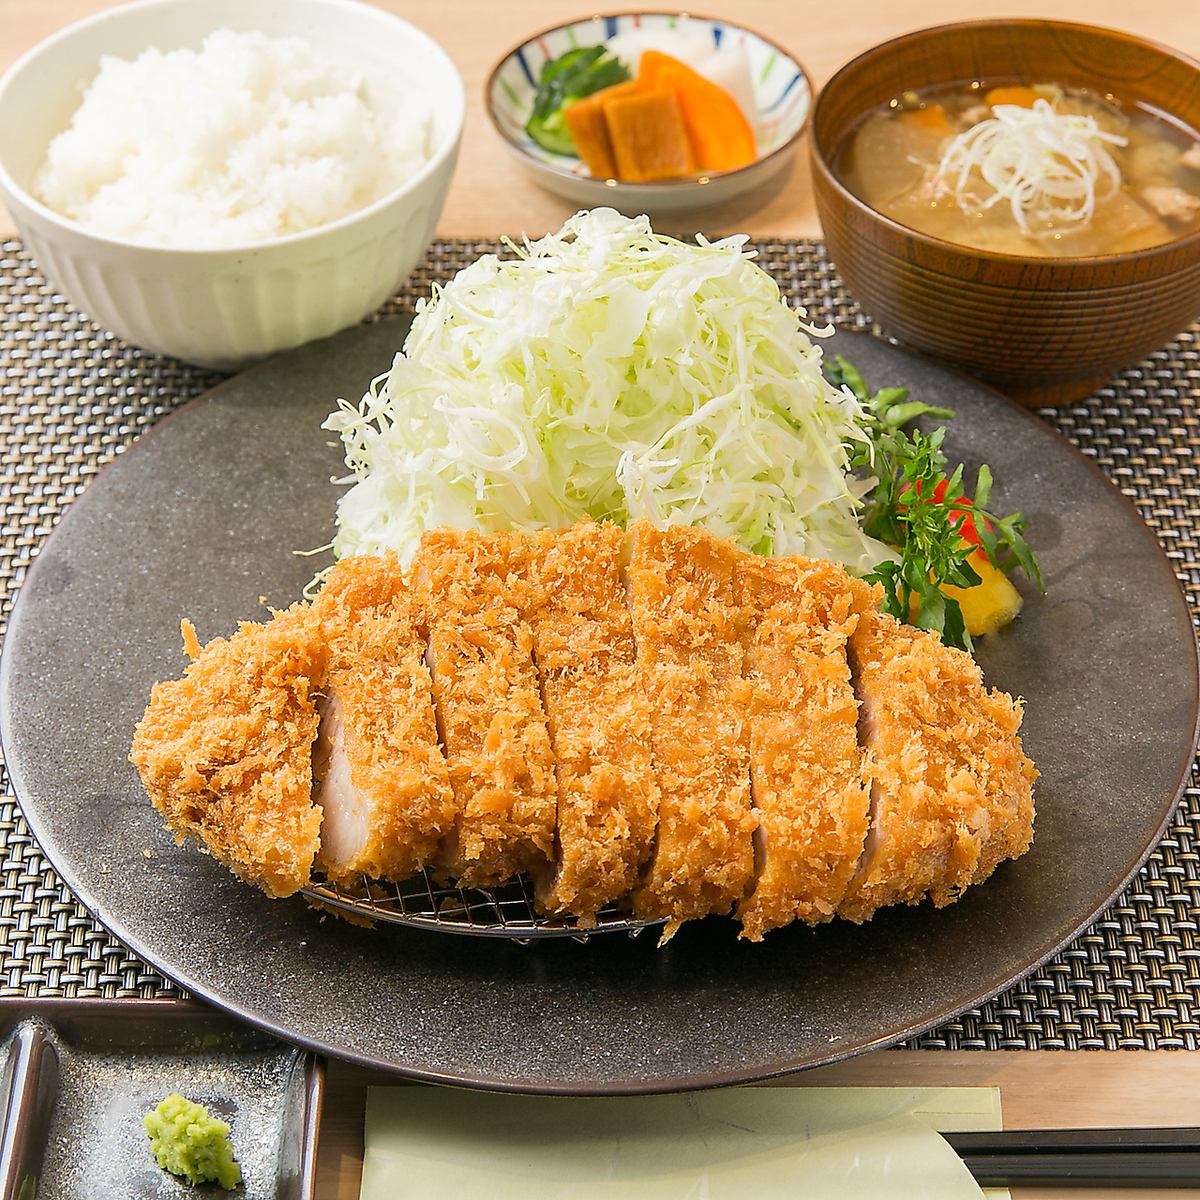 A 5-minute walk from Shimbashi and Uchisaiwaicho ♪ We offer the supreme pork cutlet made from carefully selected ingredients!